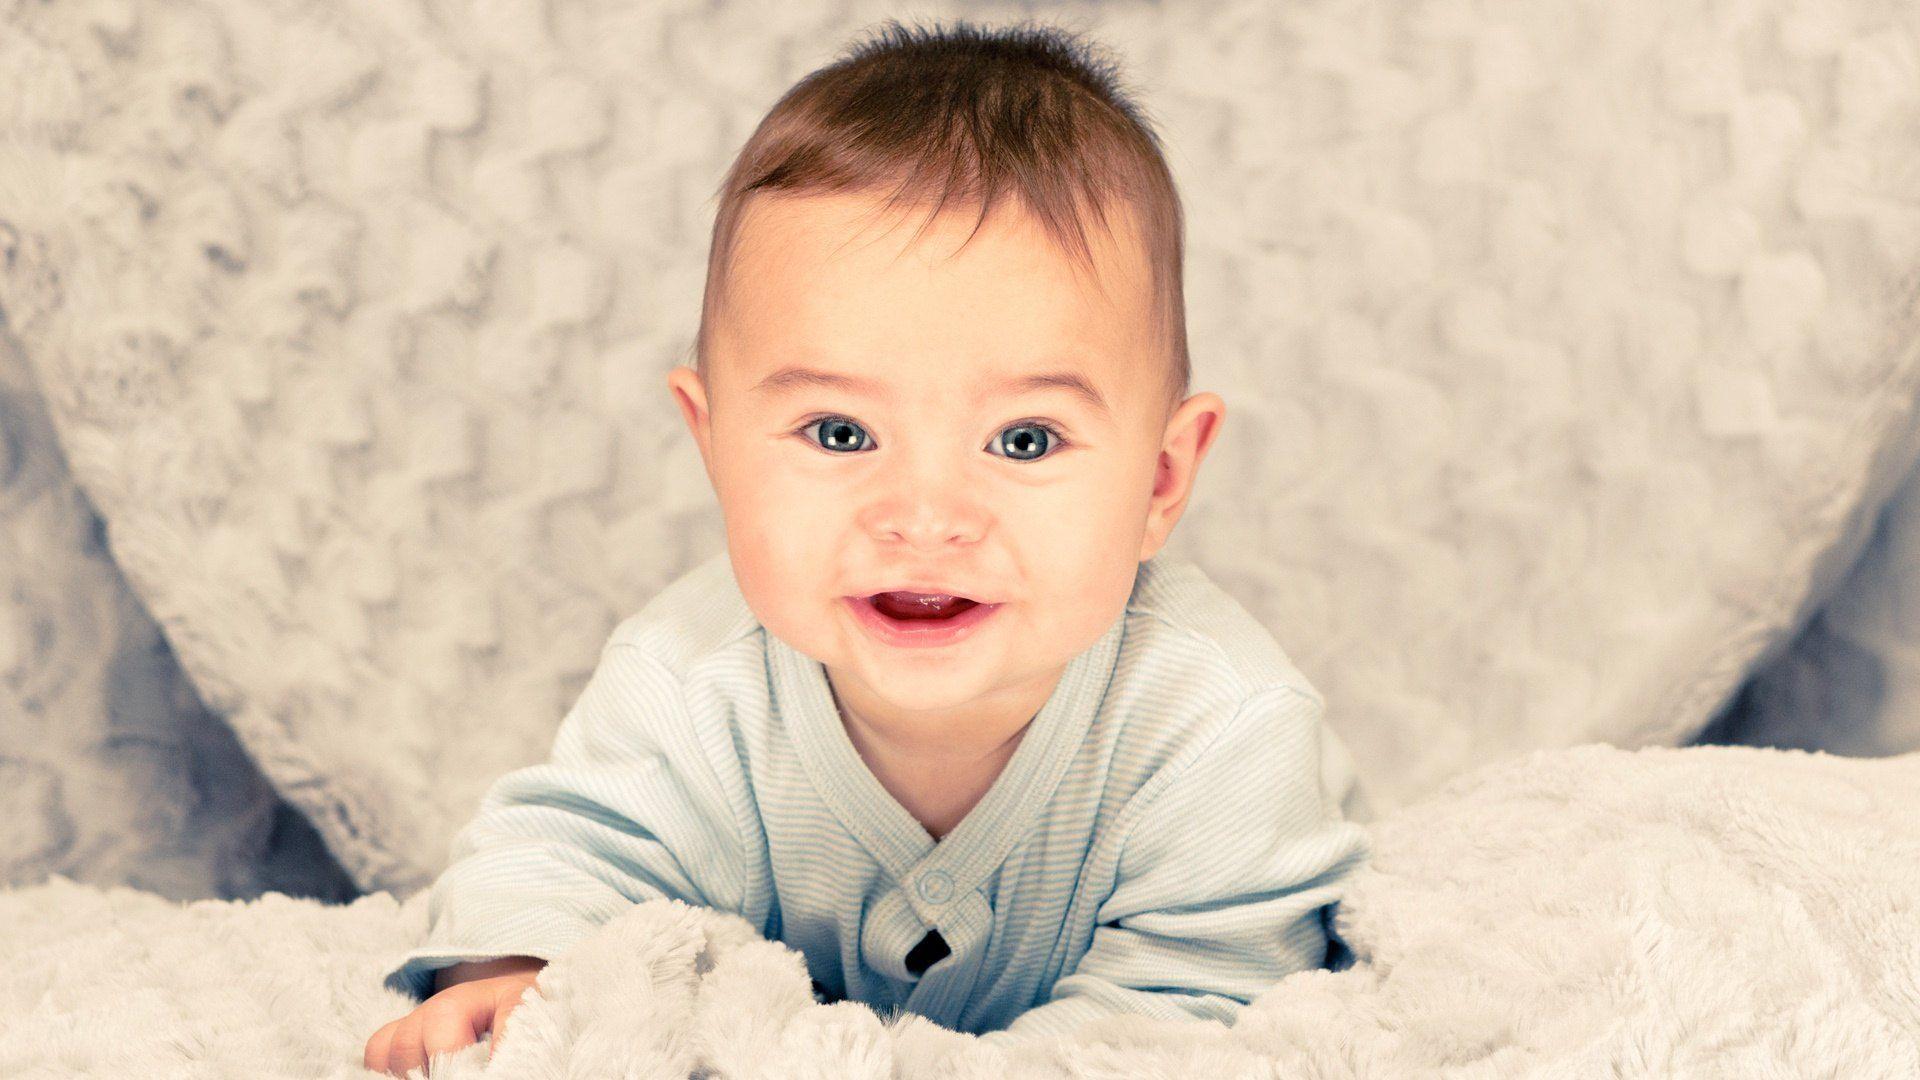 Adorable Cute Baby Boy Wallpaper Download for Phone